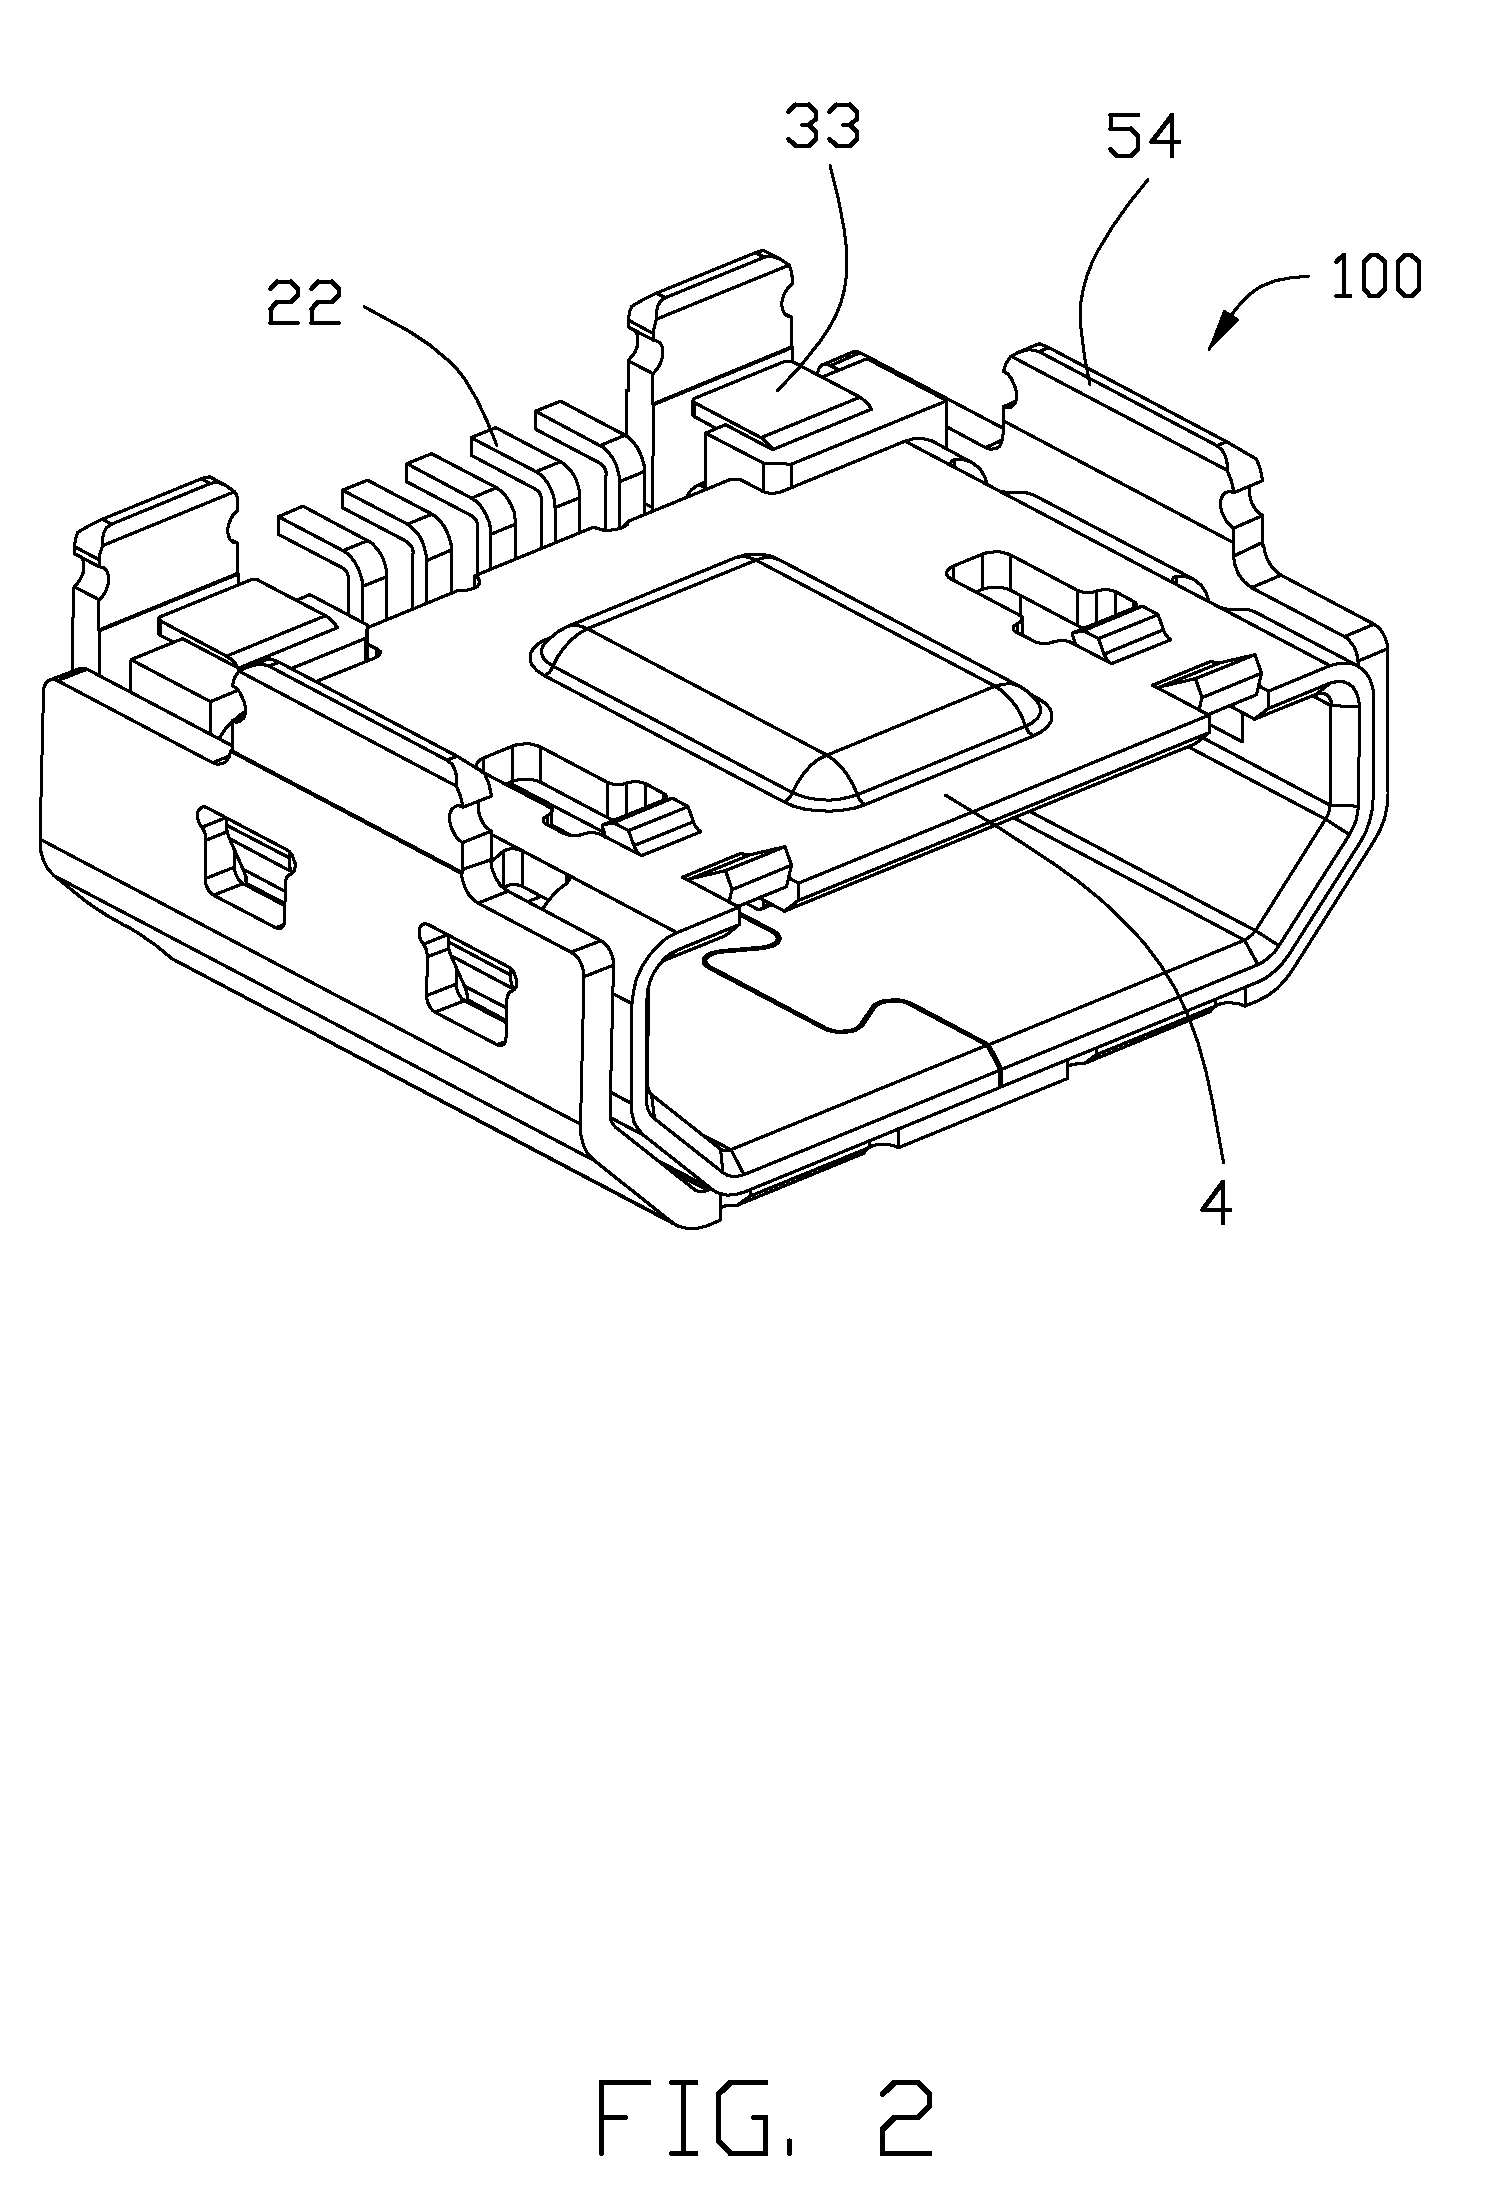 Electrical connector with a metal plate for preventing electromagnetic interference